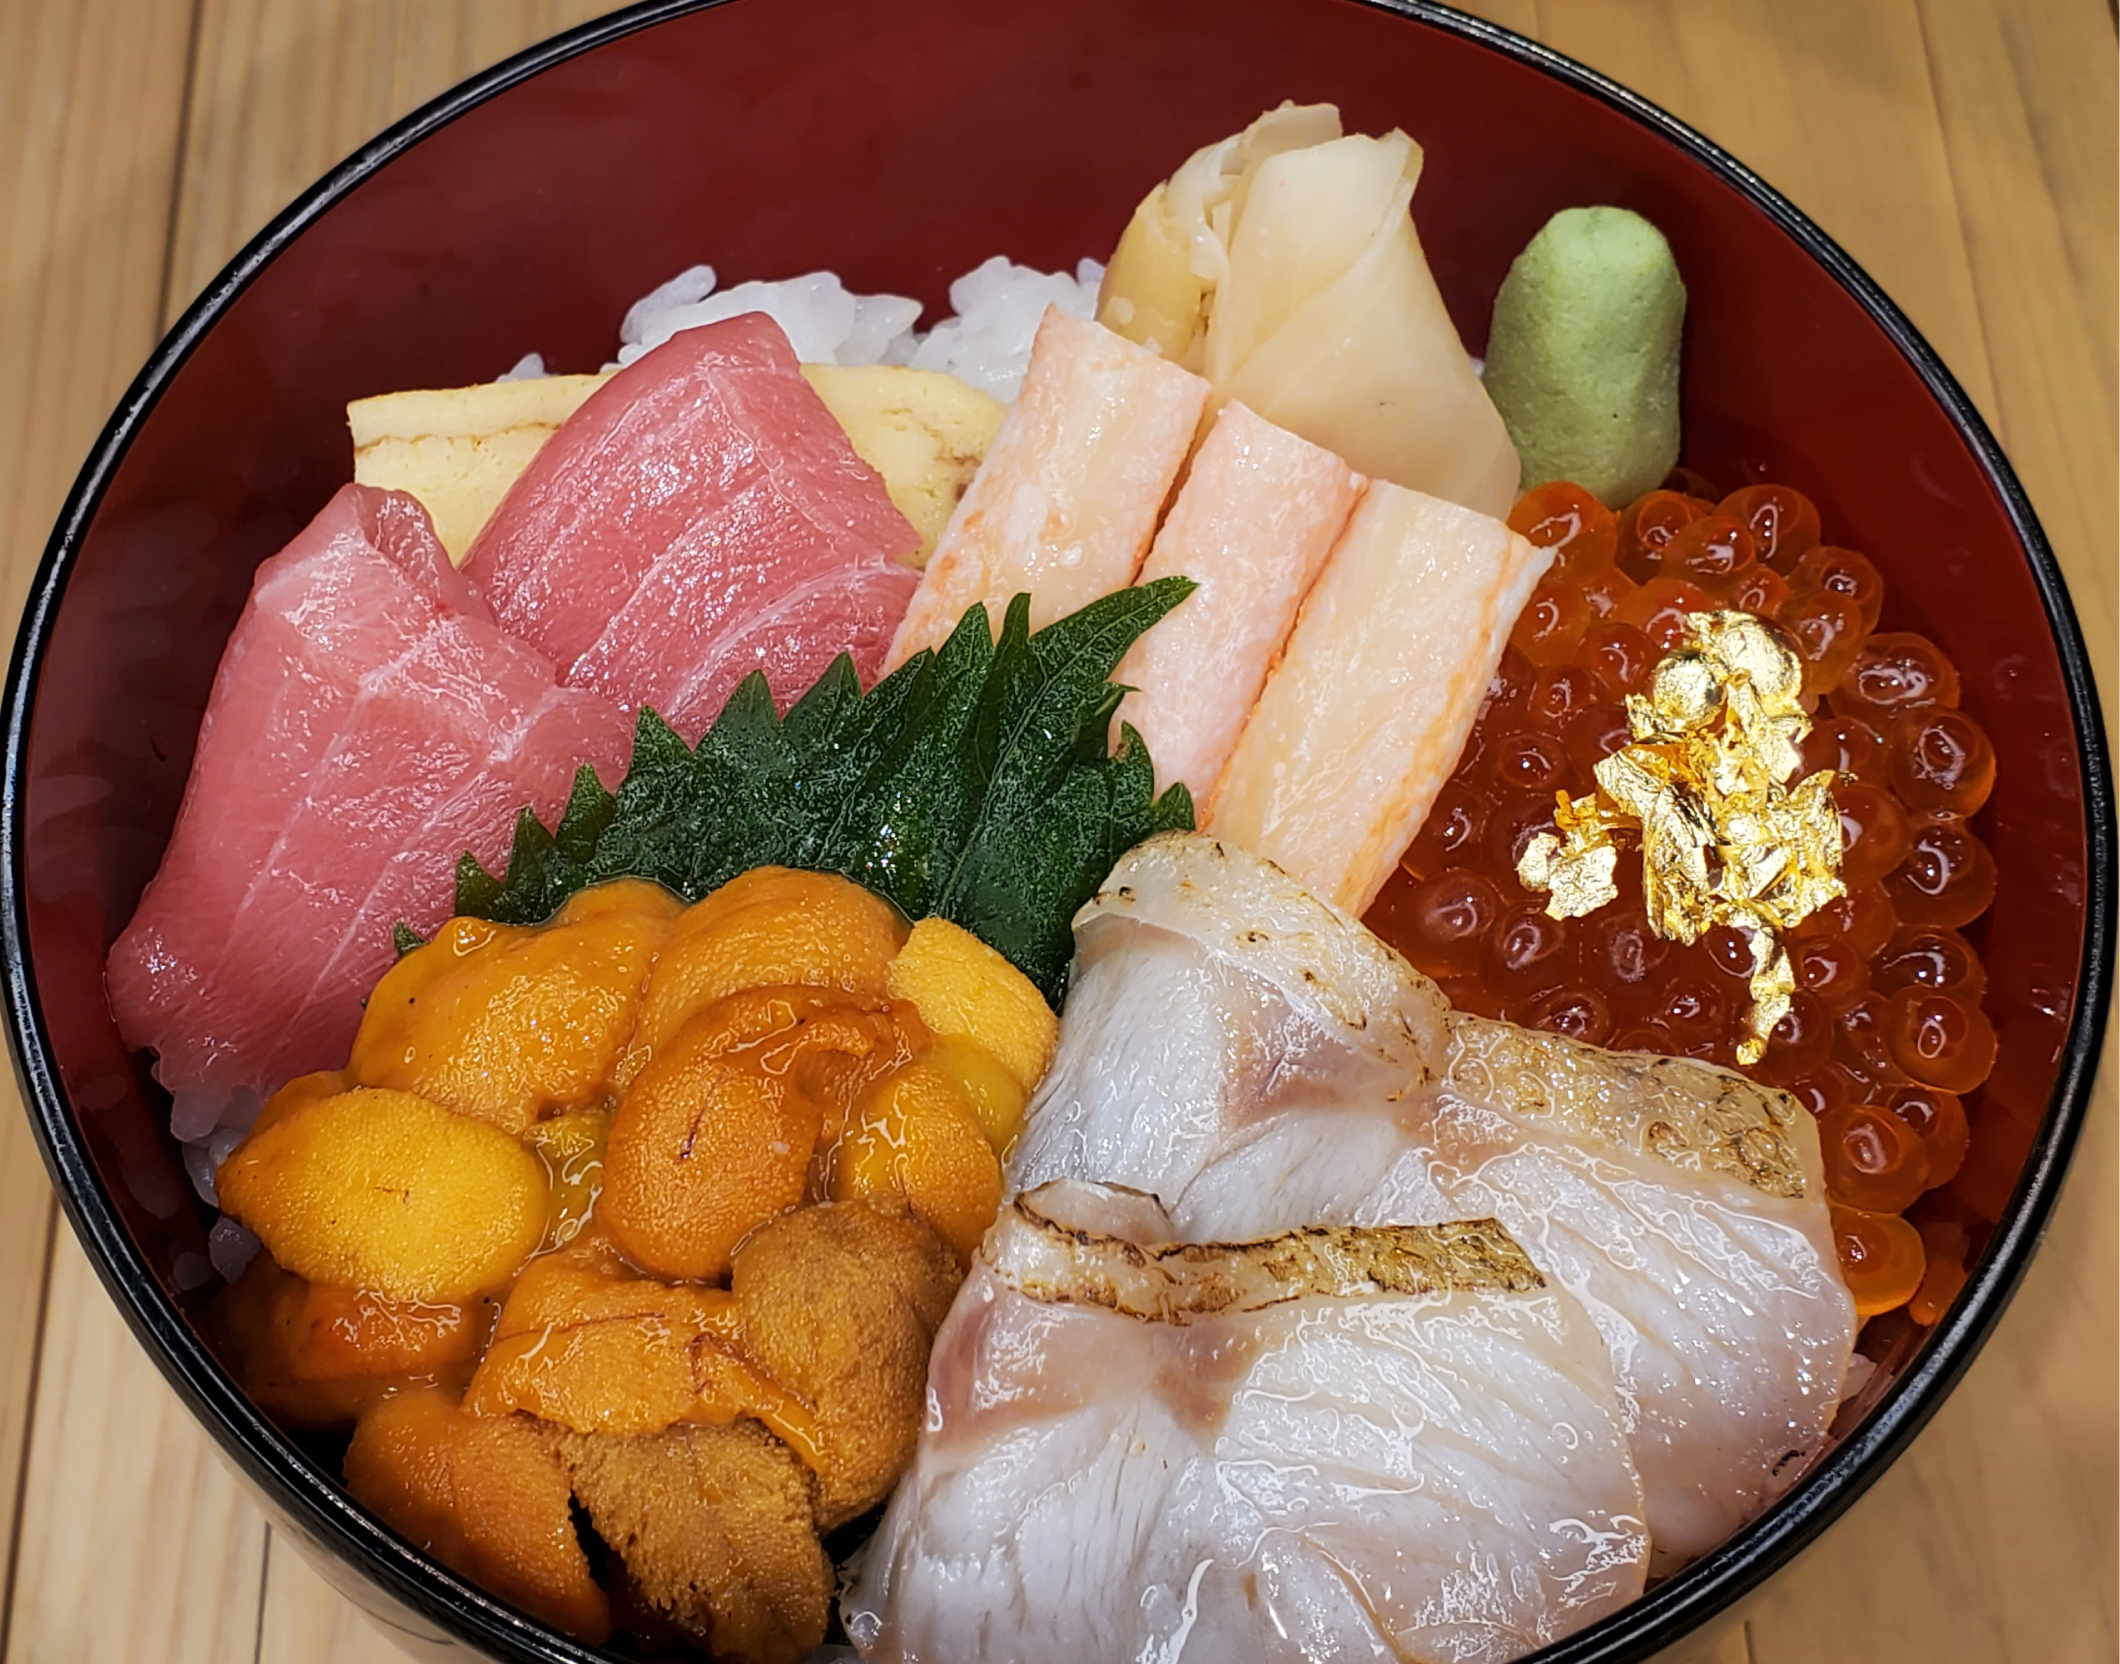 [Special Selection Assortment] Nami-no-Hana (a sumptuous seafood rice bowl, topped with bluefin tuna, sea urchin, snow crab, Nodoguro seabass, and other ingredients)